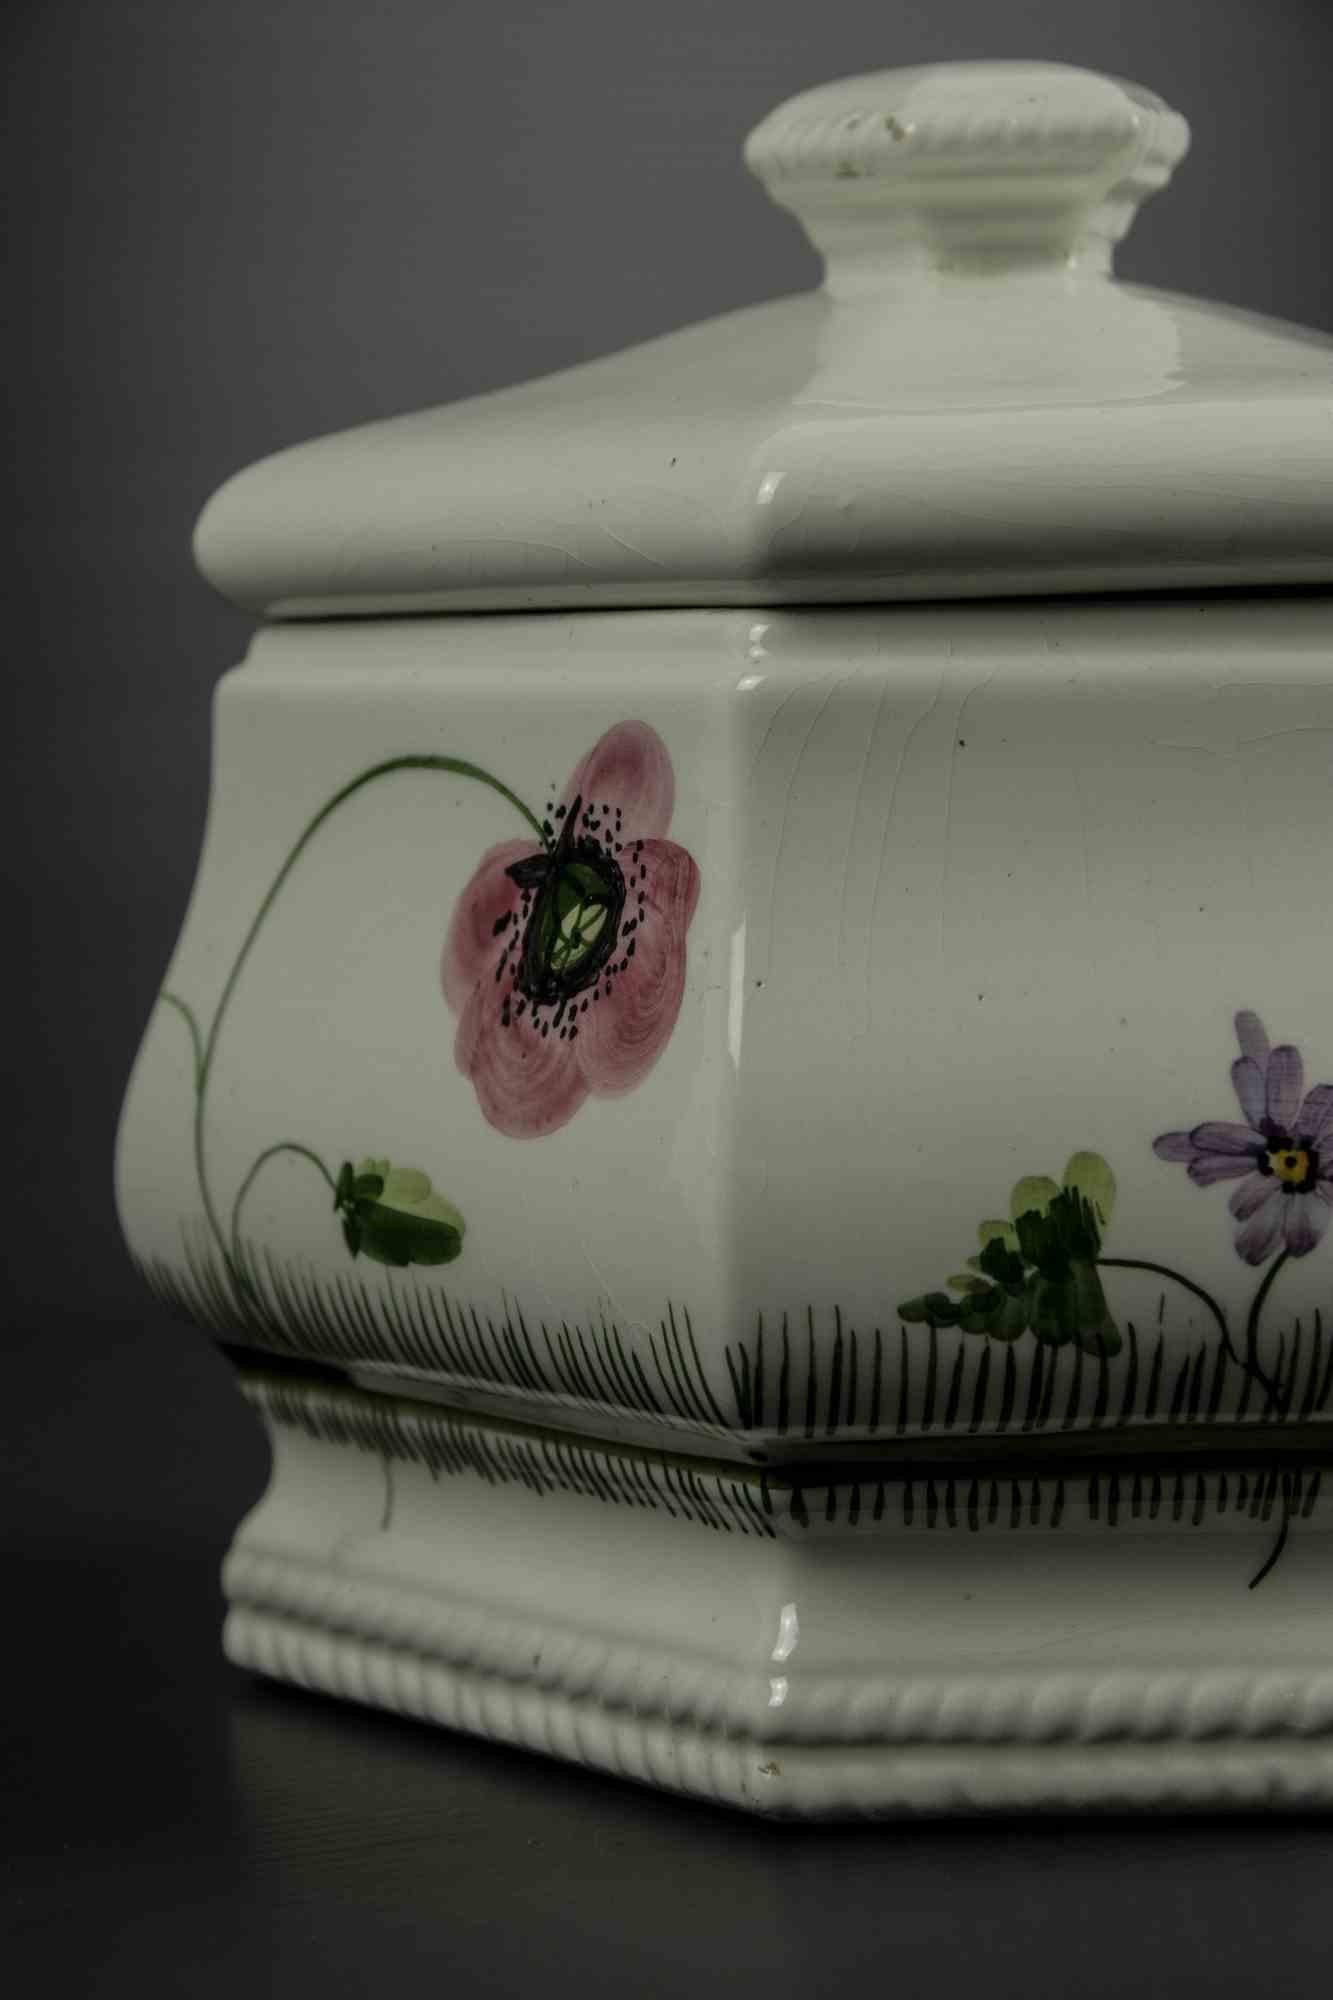 Soup bowl is an original decorative object realized in the mid-20th century.

Original ceramics. 

Hand-made and hand-colored.

Made in Italy.

The bowl is decorated with flowers and ears of wheat.

Total dimensions: 17 x 20 x 17